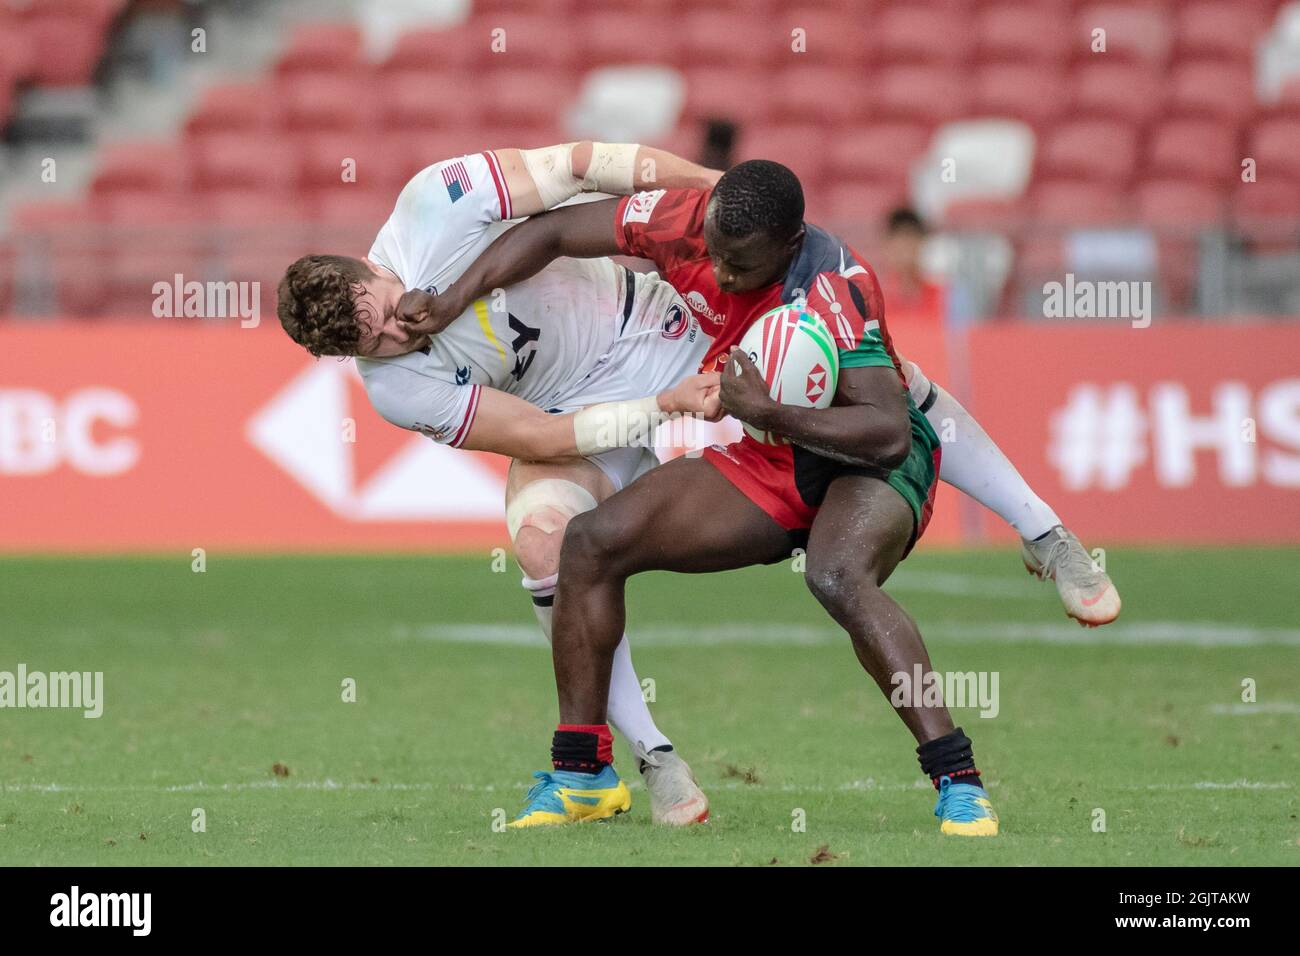 SINGAPORE-APRIL 13:Kenya 7s Team (red) plays against USA 7s team (white) during Day 1 of HSBC World Rugby Singapore Sevens on April 13, 2019 at National Stadium in Singapore Stock Photo